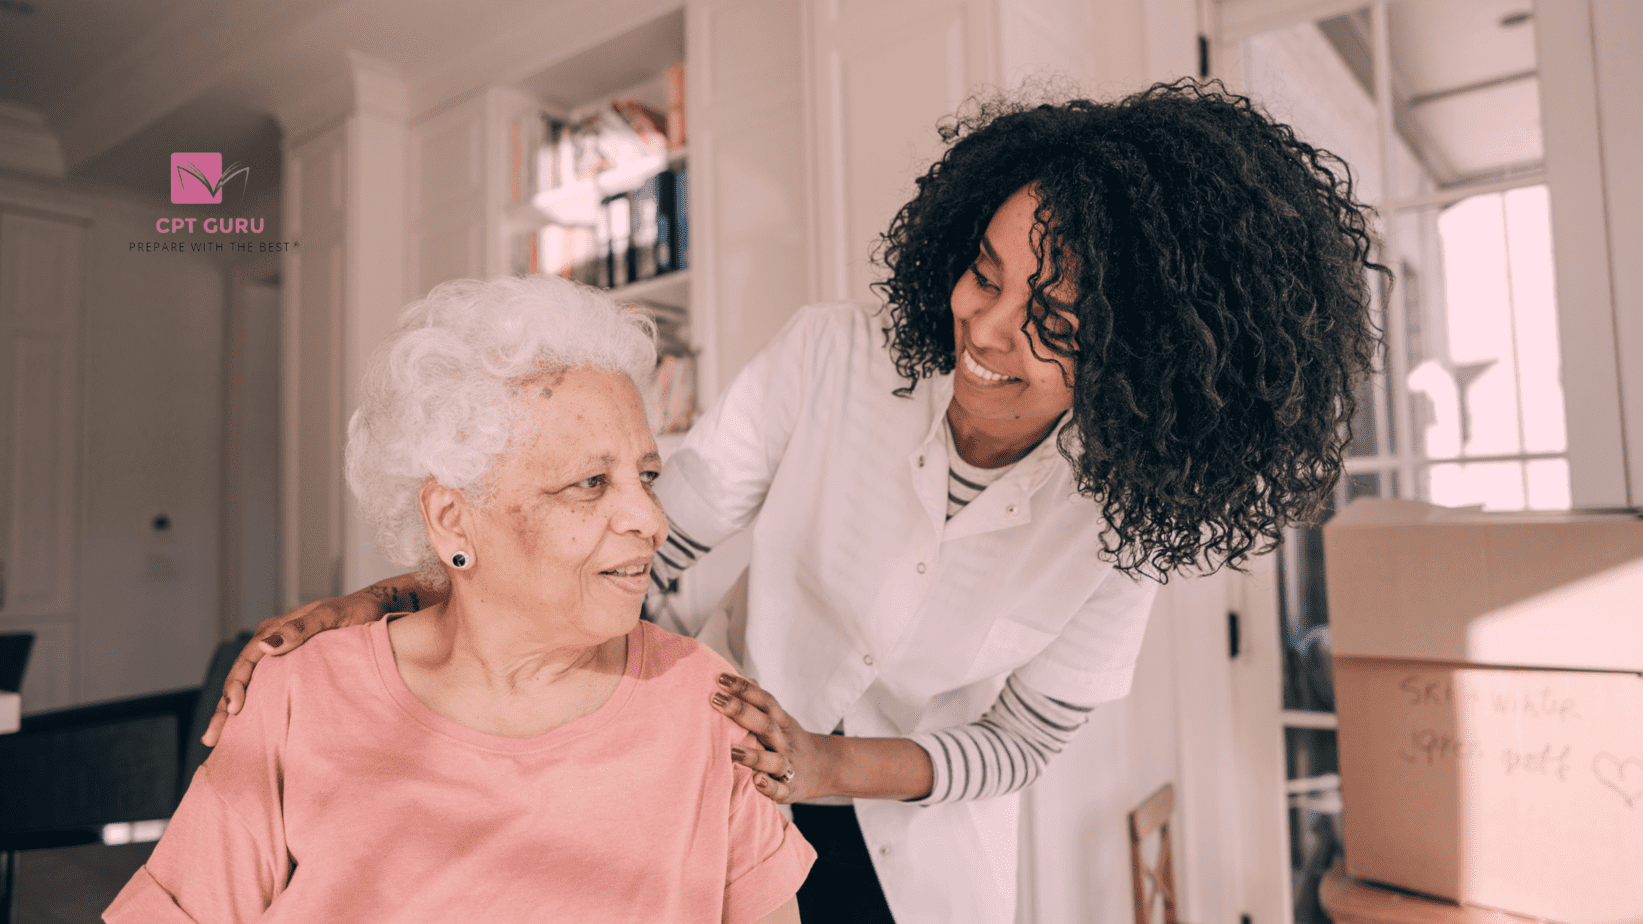 How to Find Cosmetology Jobs in Nursing Homes